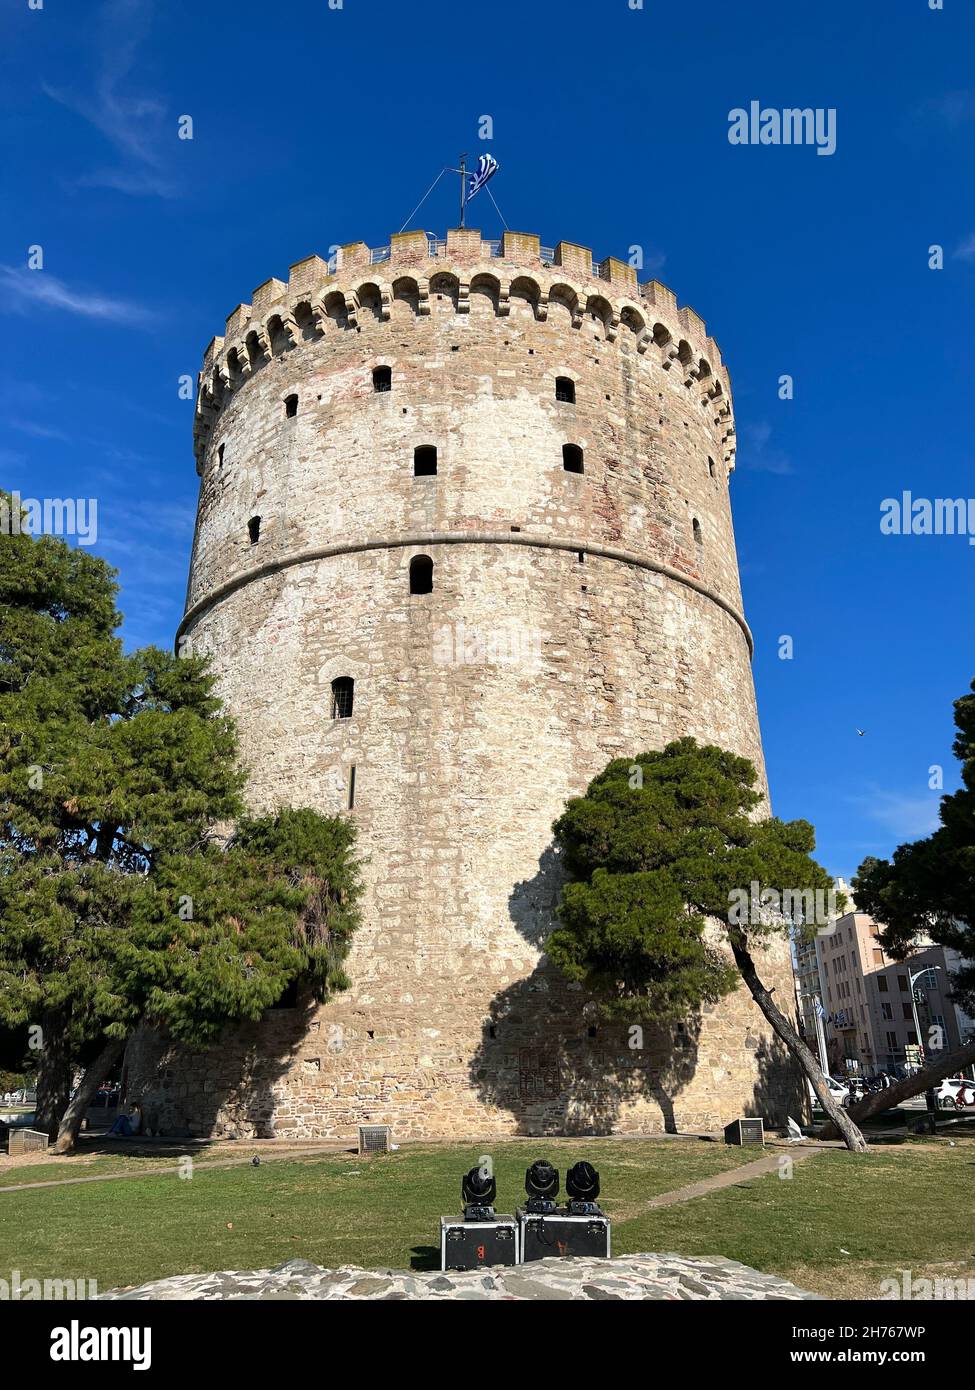 White Tower of Thessaloniki city, on a sunny day Stock Photo